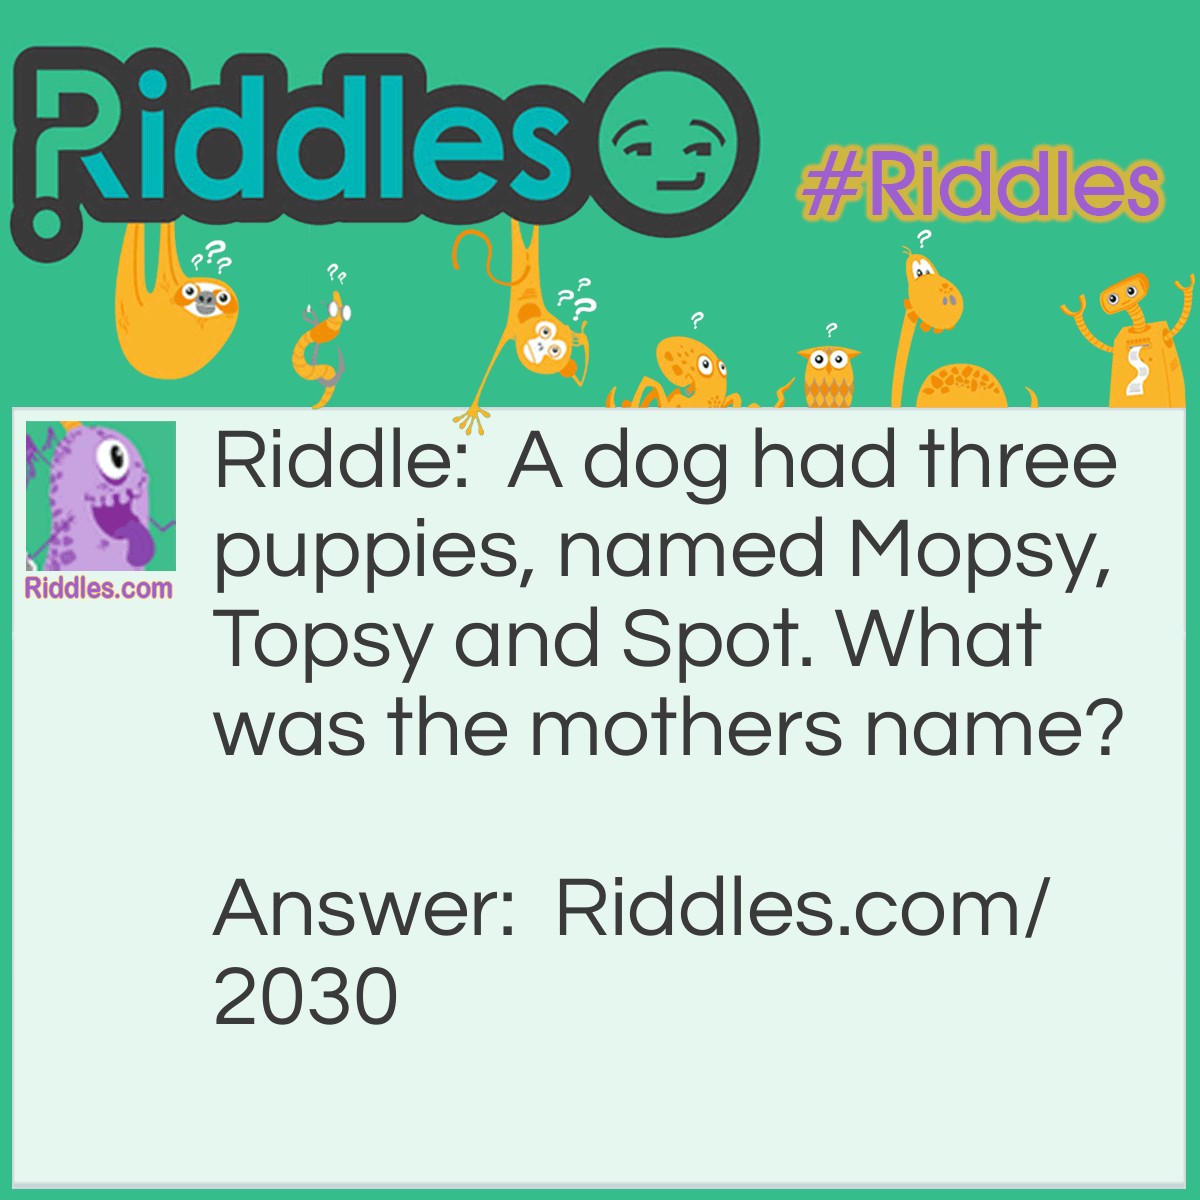 Riddle: A dog had three puppies, named Mopsy, Topsy and Spot. What was the mothers name? Answer: What